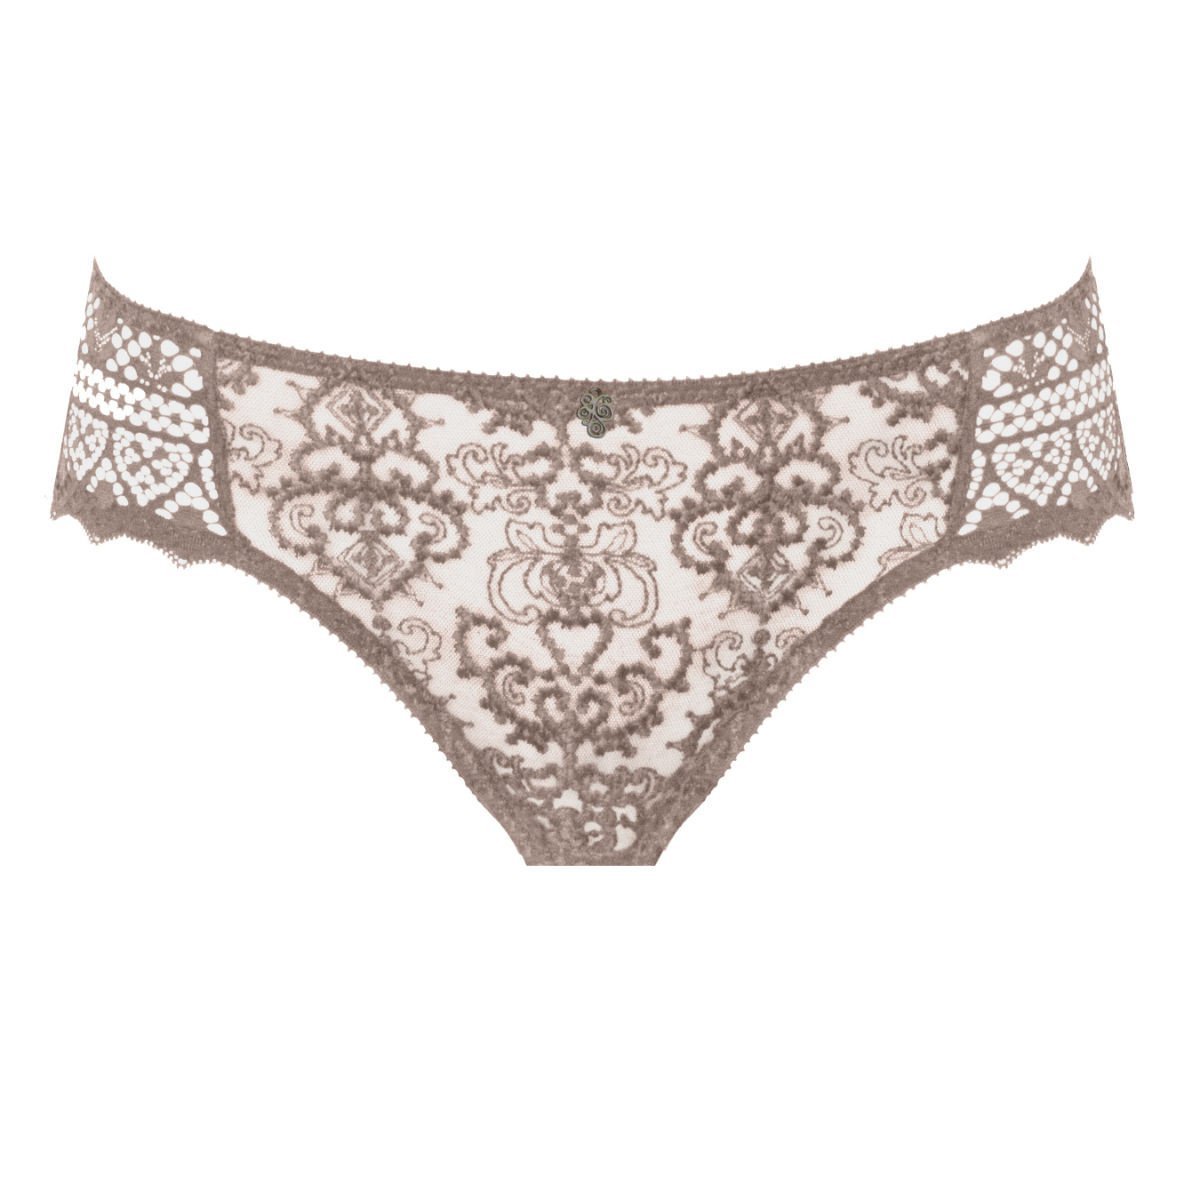 Empreinte cassiopee lace brief panty in rose nude french lingerie canada linea intima